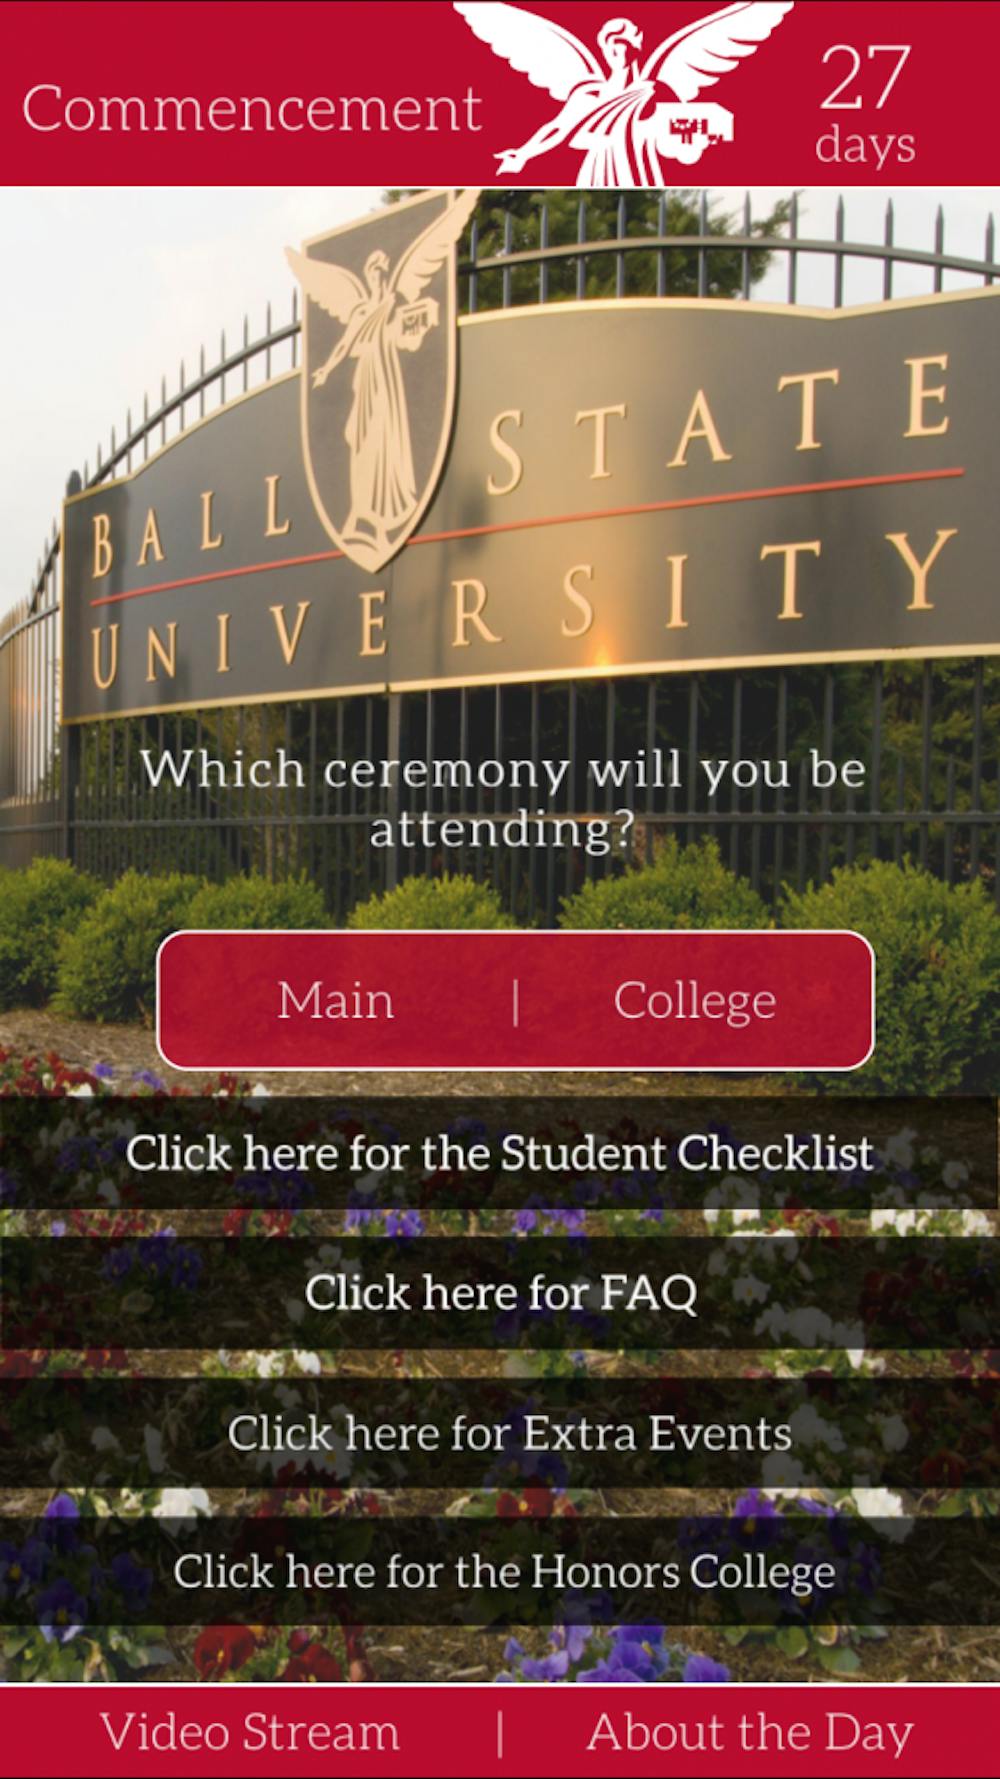 PHOTO COURTESY OF BALL STATE UNIVERSITY COMMENCEMENT APP